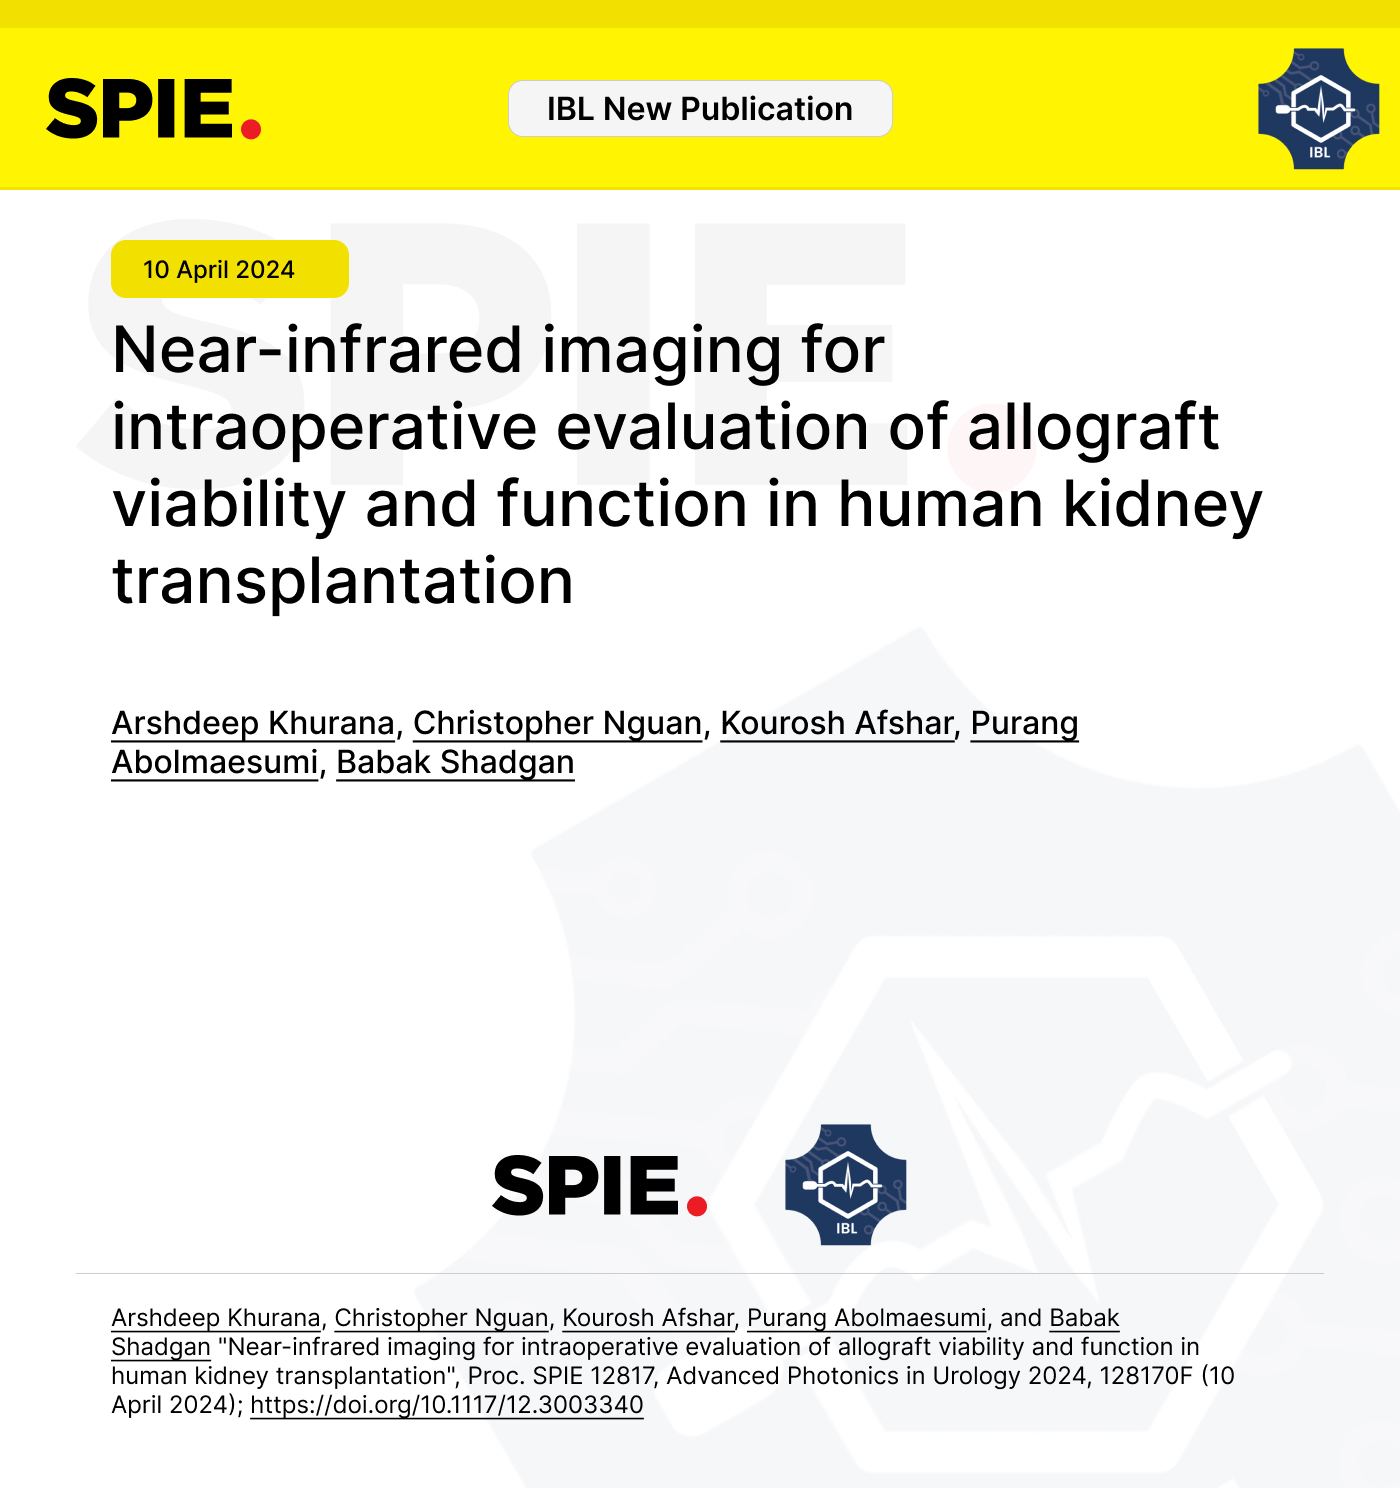 New Publication: Near-infrared imaging for intraoperative evaluation of allograft viability and function in human kidney transplantation